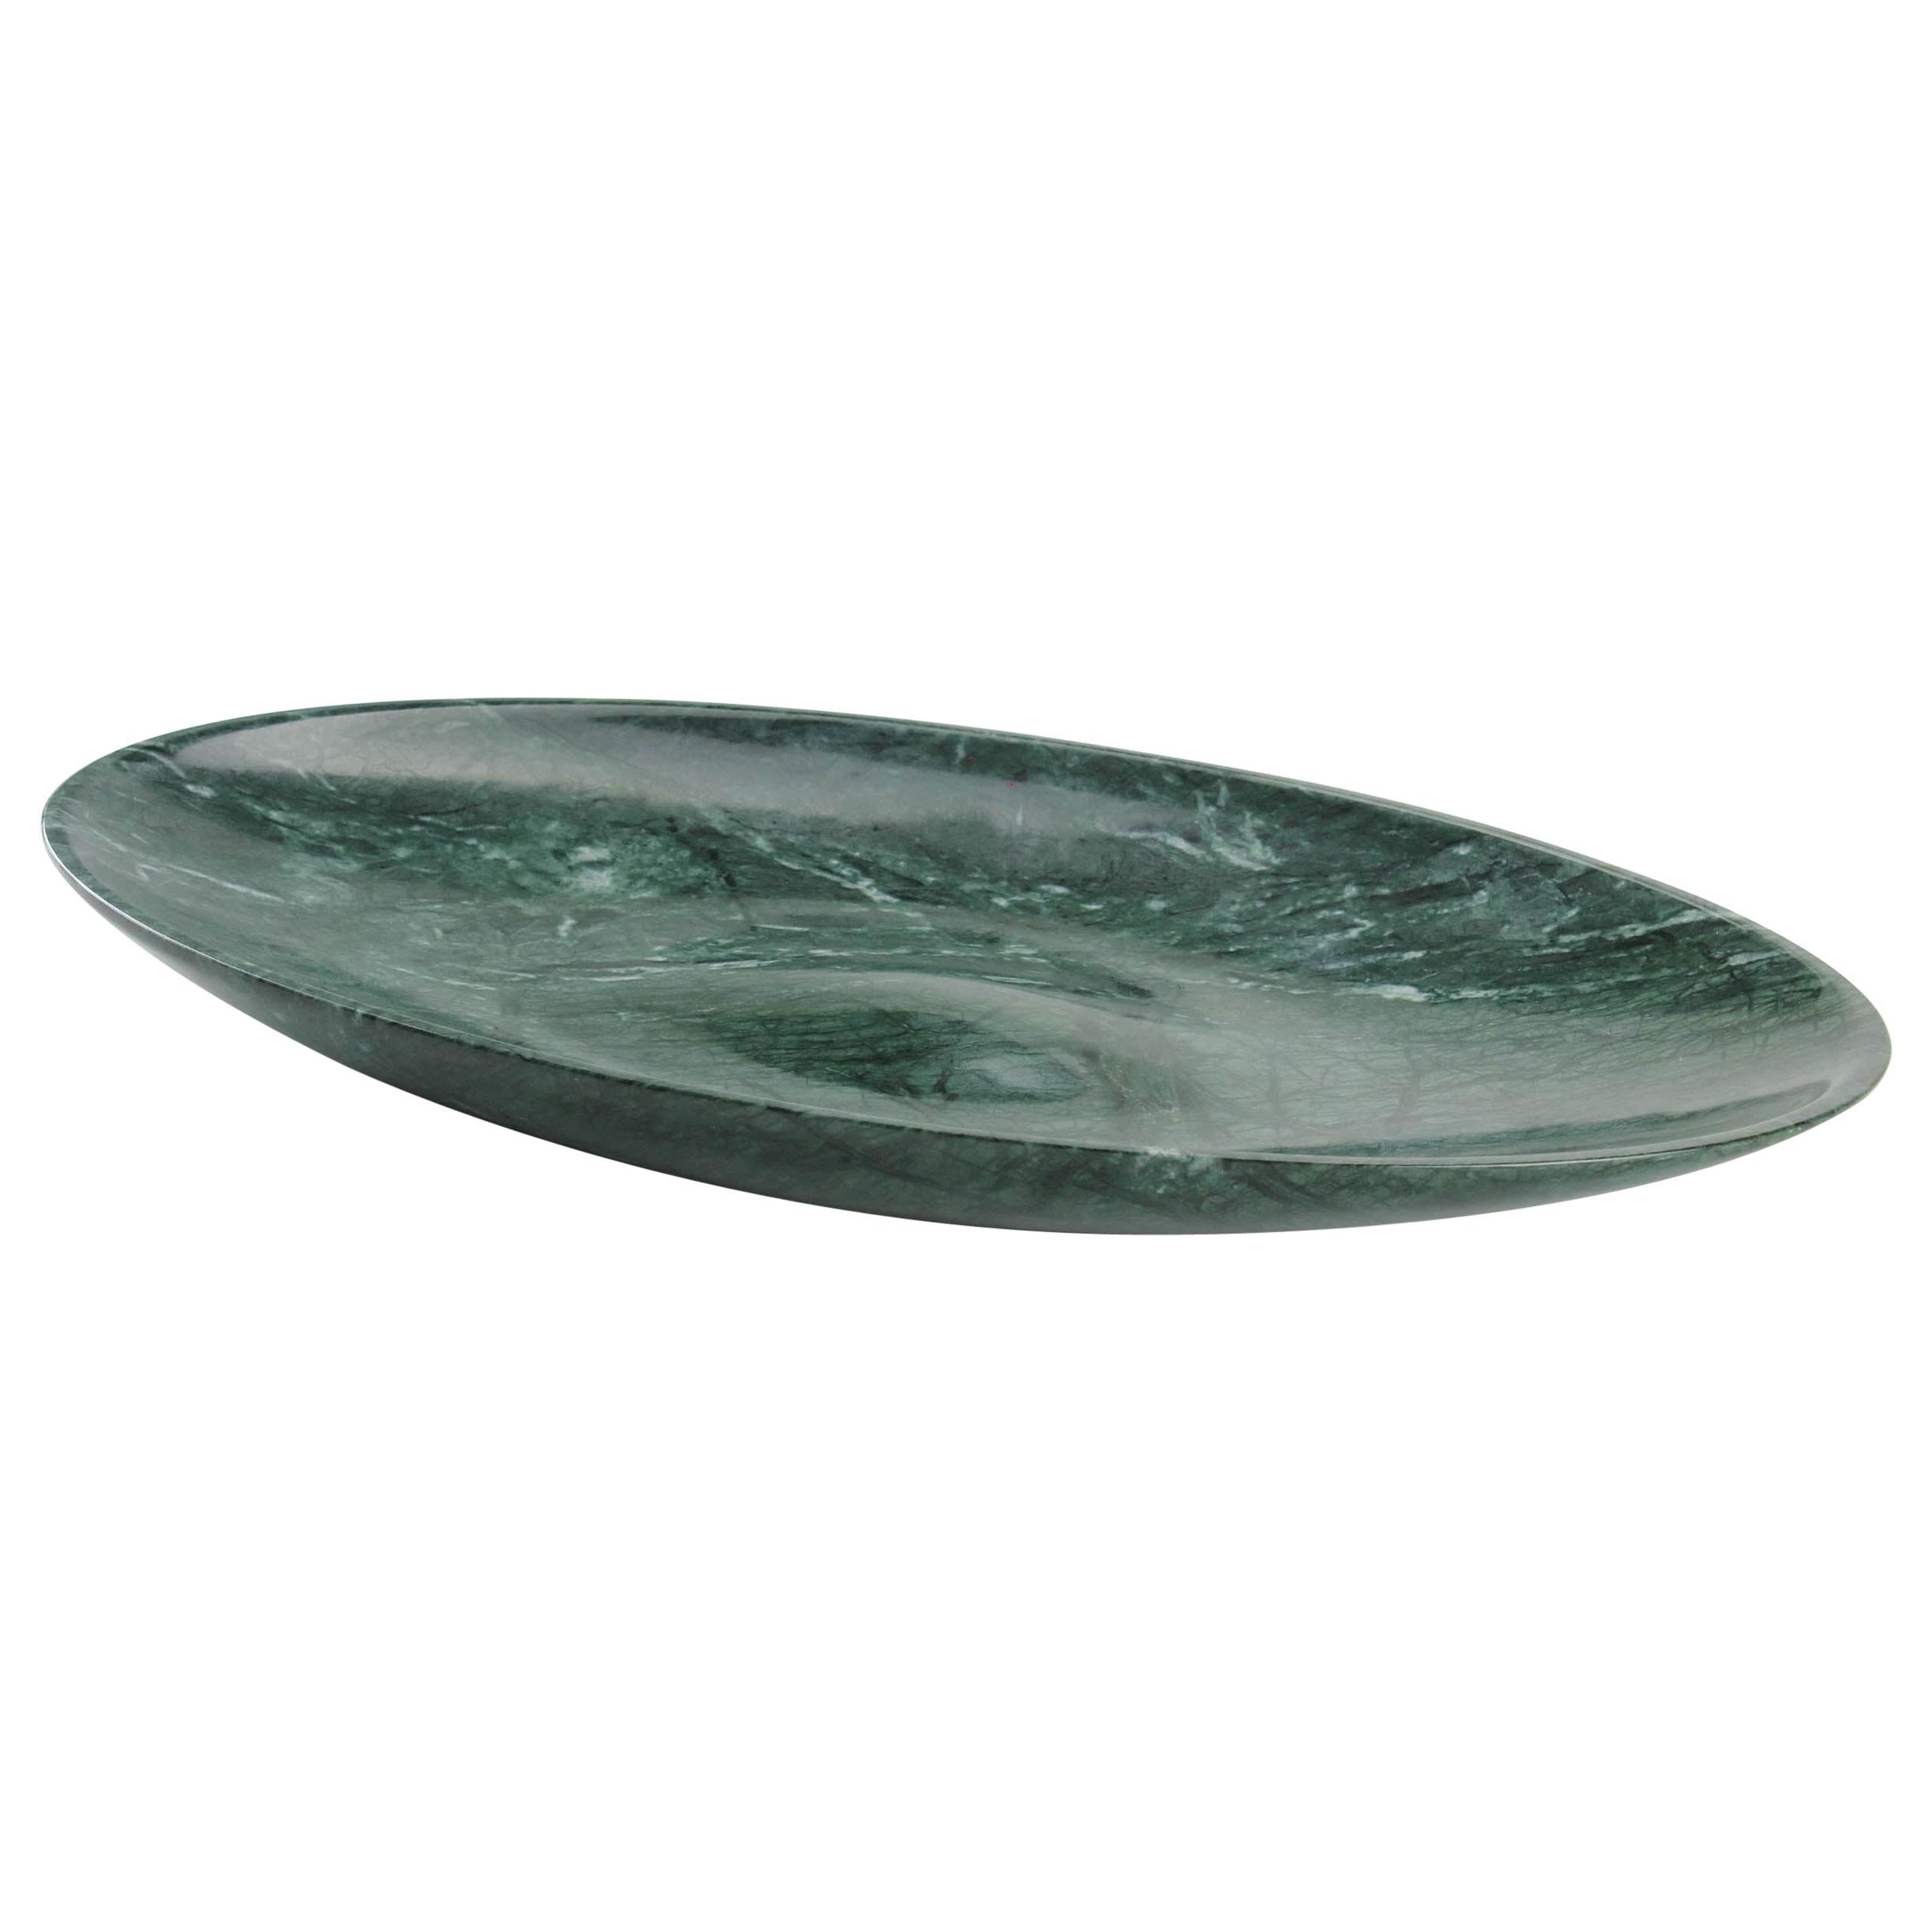 Bowl Centerpiece Vessel Imperial Green Marble Handmade Italy Collectible Design